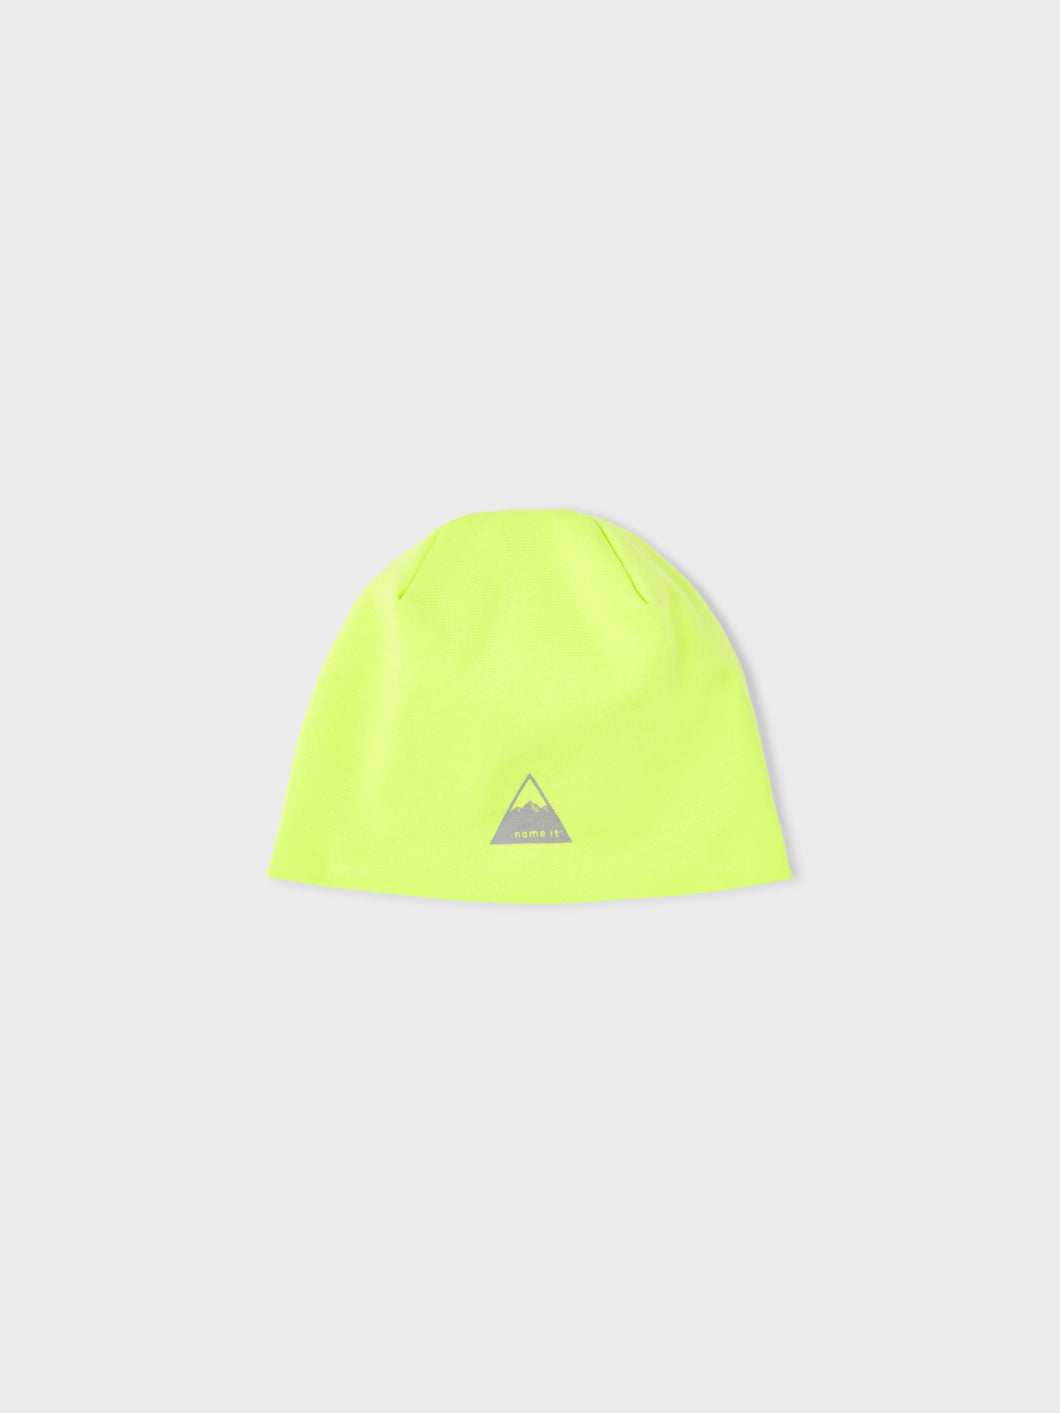 NKNMAXI Accessories - Acid Lime